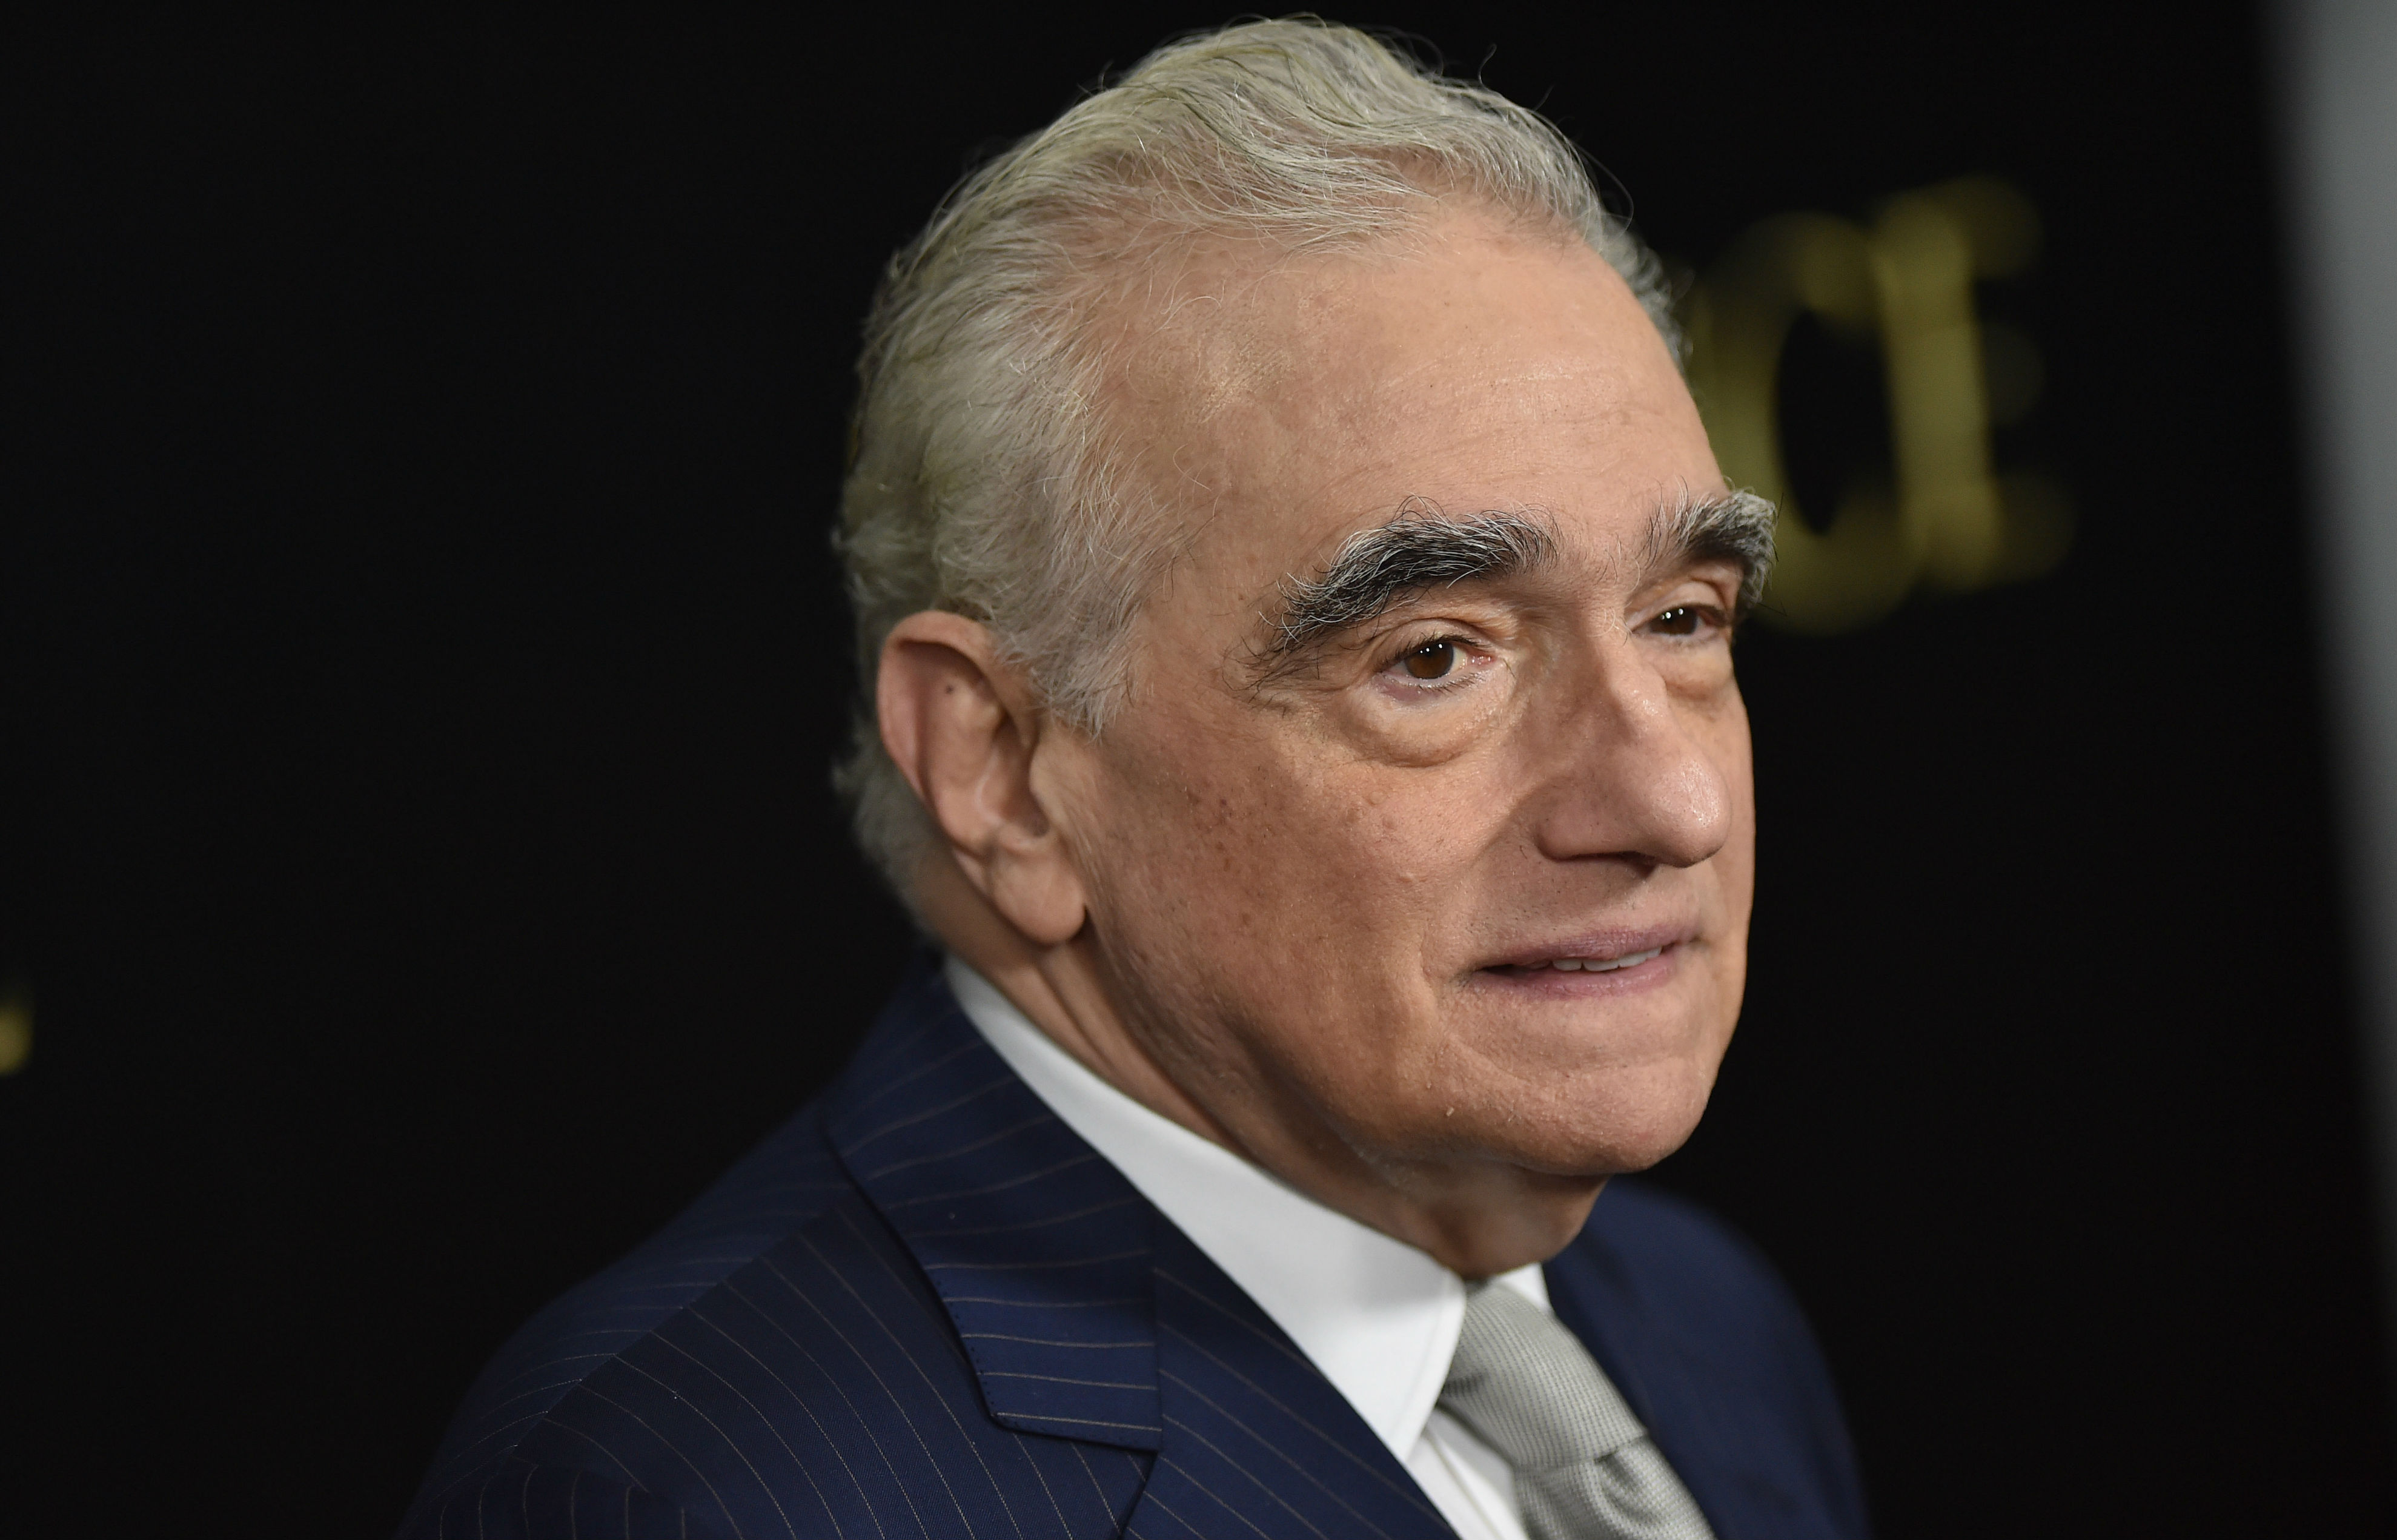 American film director and producer, Scorsese, says a childhood of faith and films continues to inspire him 